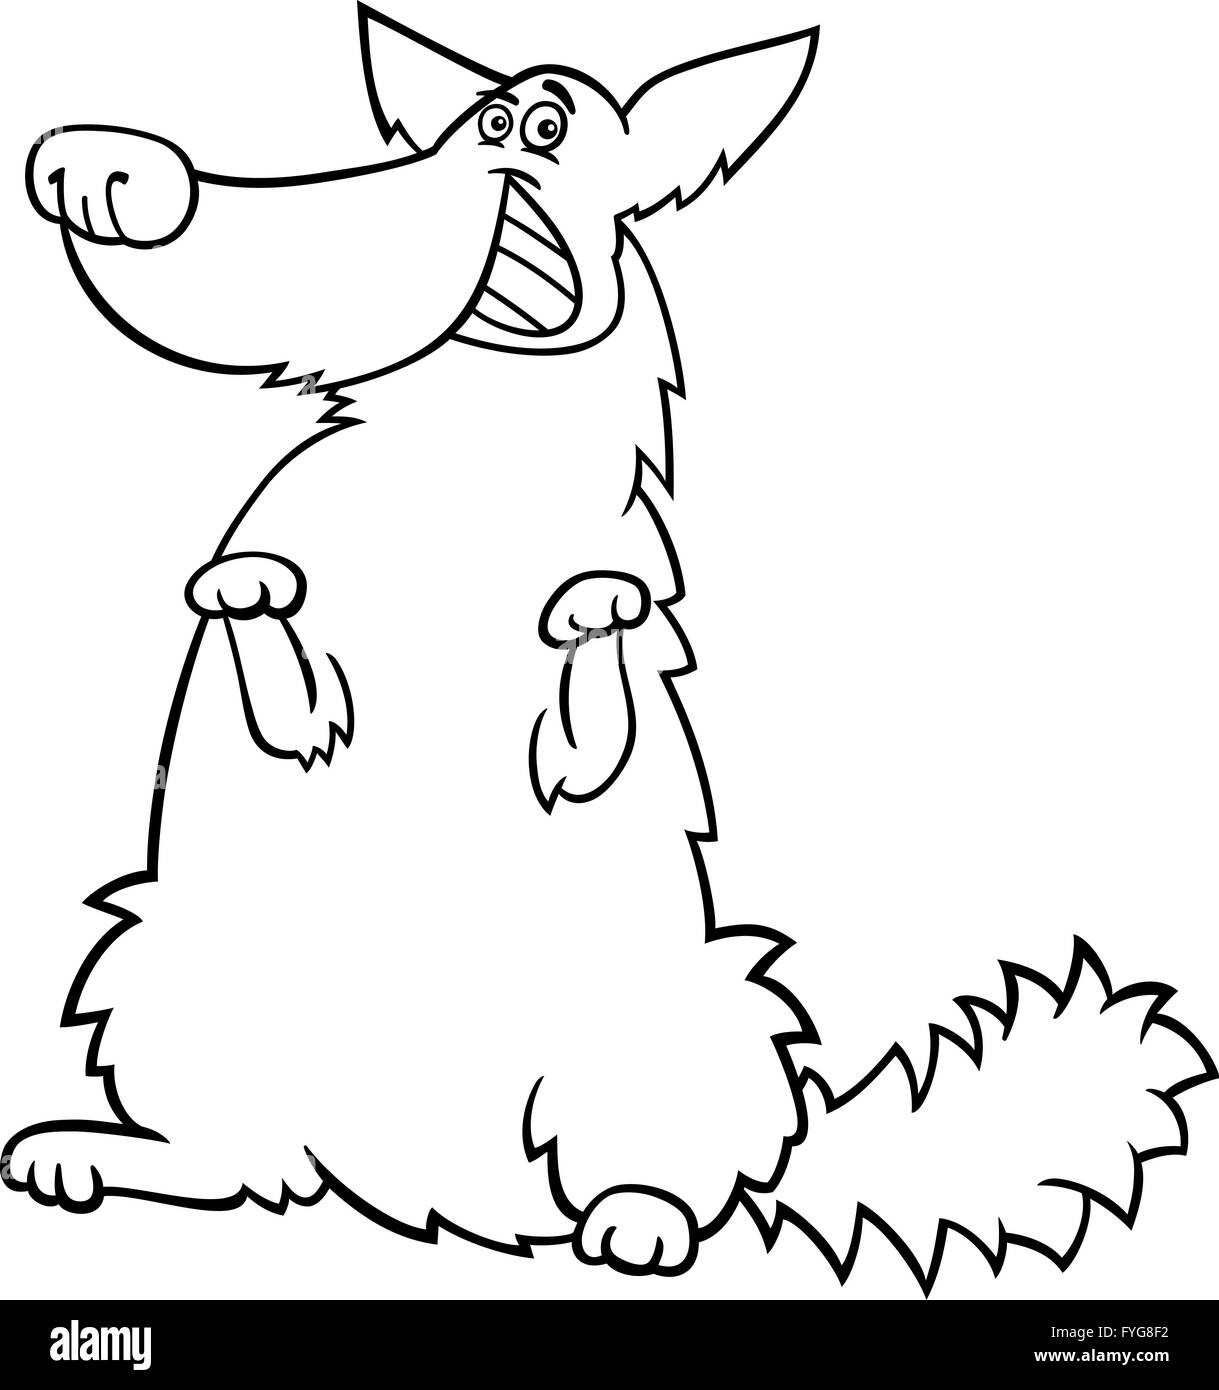 happy shaggy dog cartoon for coloring book Stock Photo